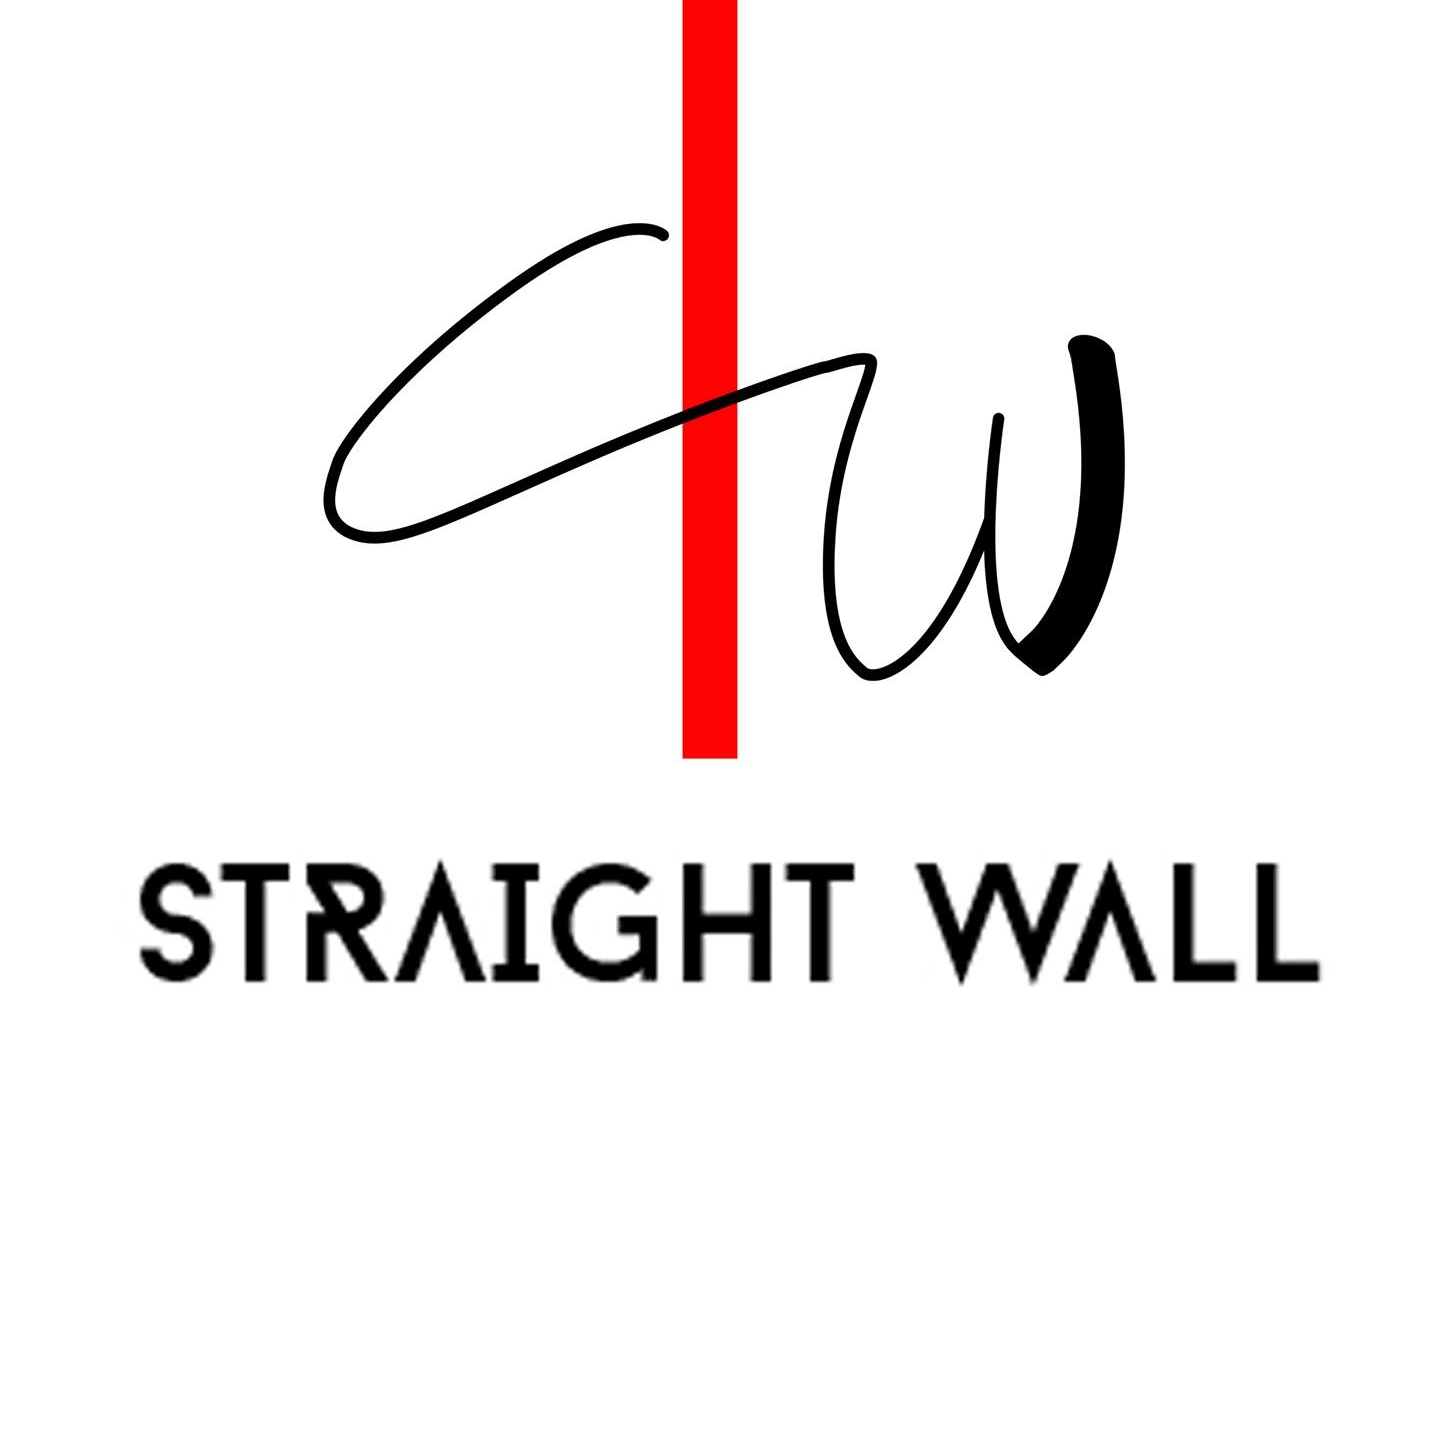 Straightwall Architects|IT Services|Professional Services